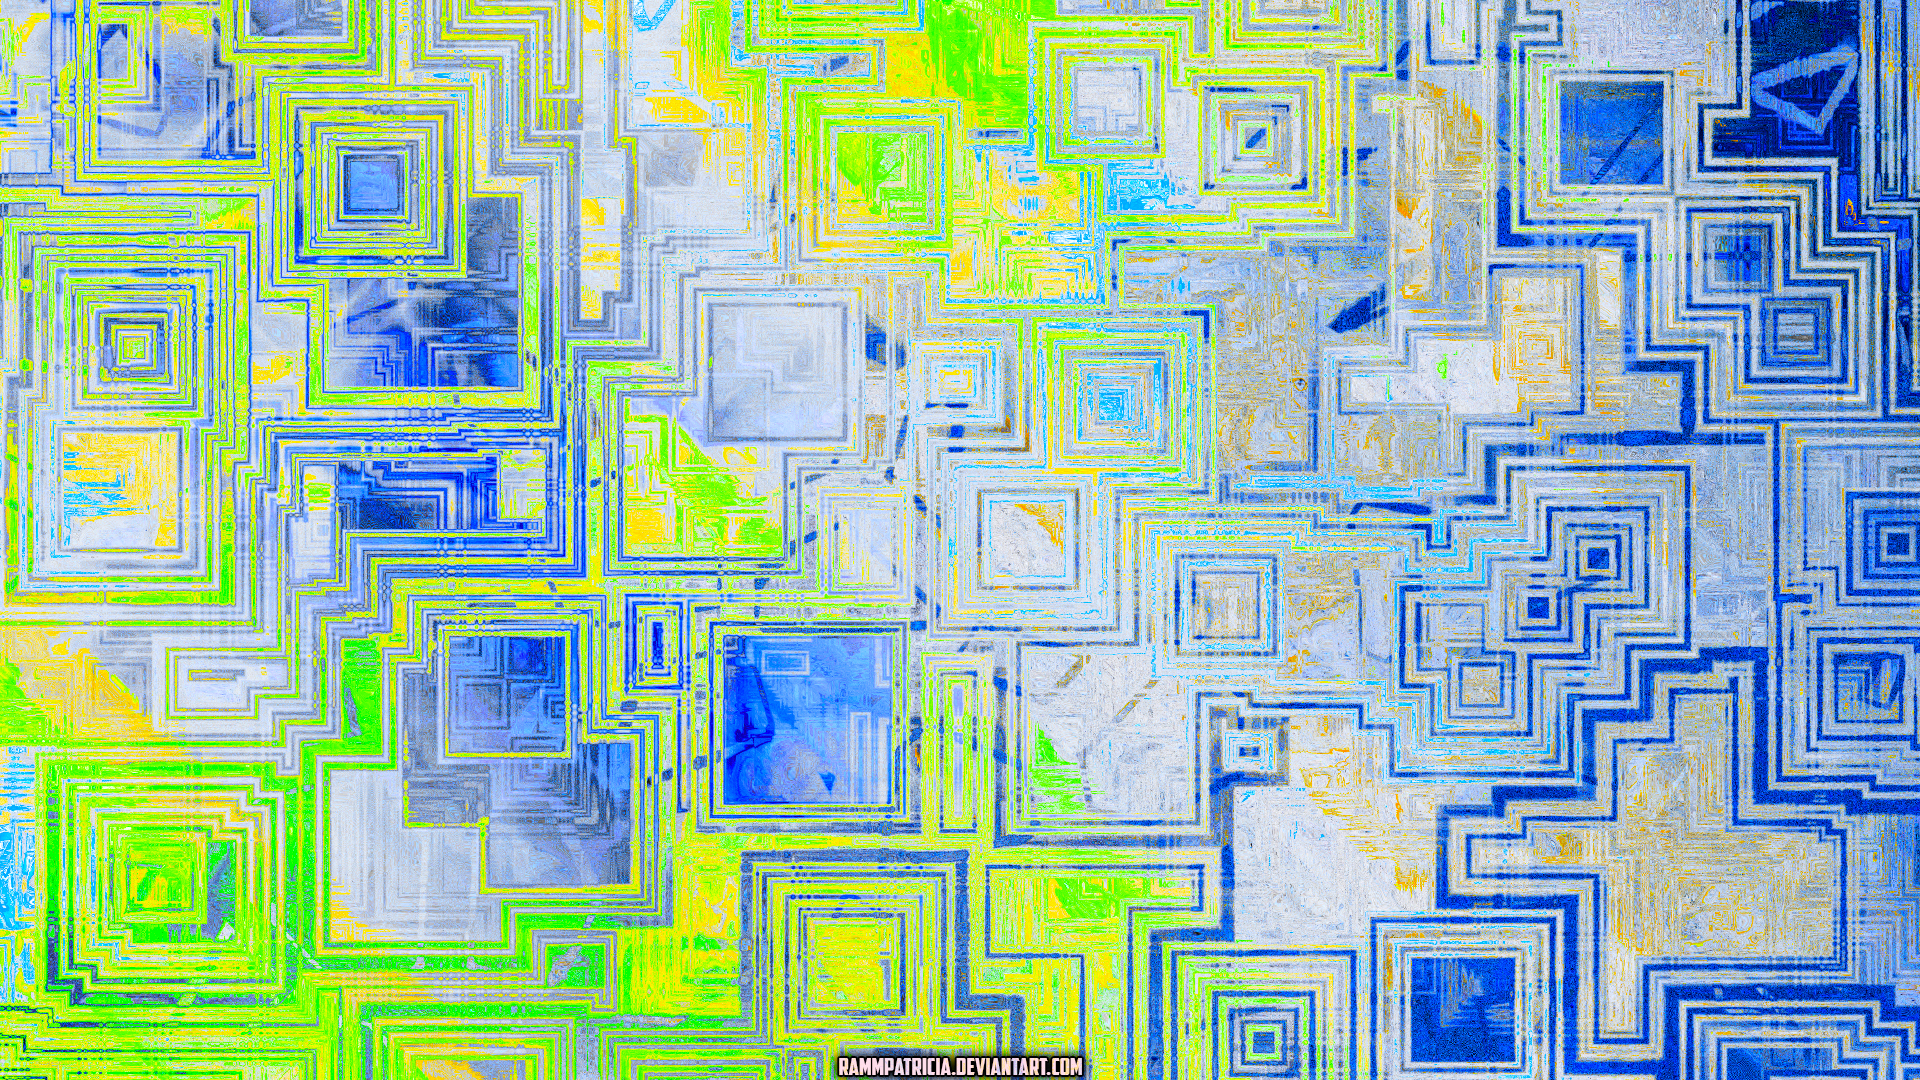 General 1920x1080 digital art RammPatricia abstract lime watermarked